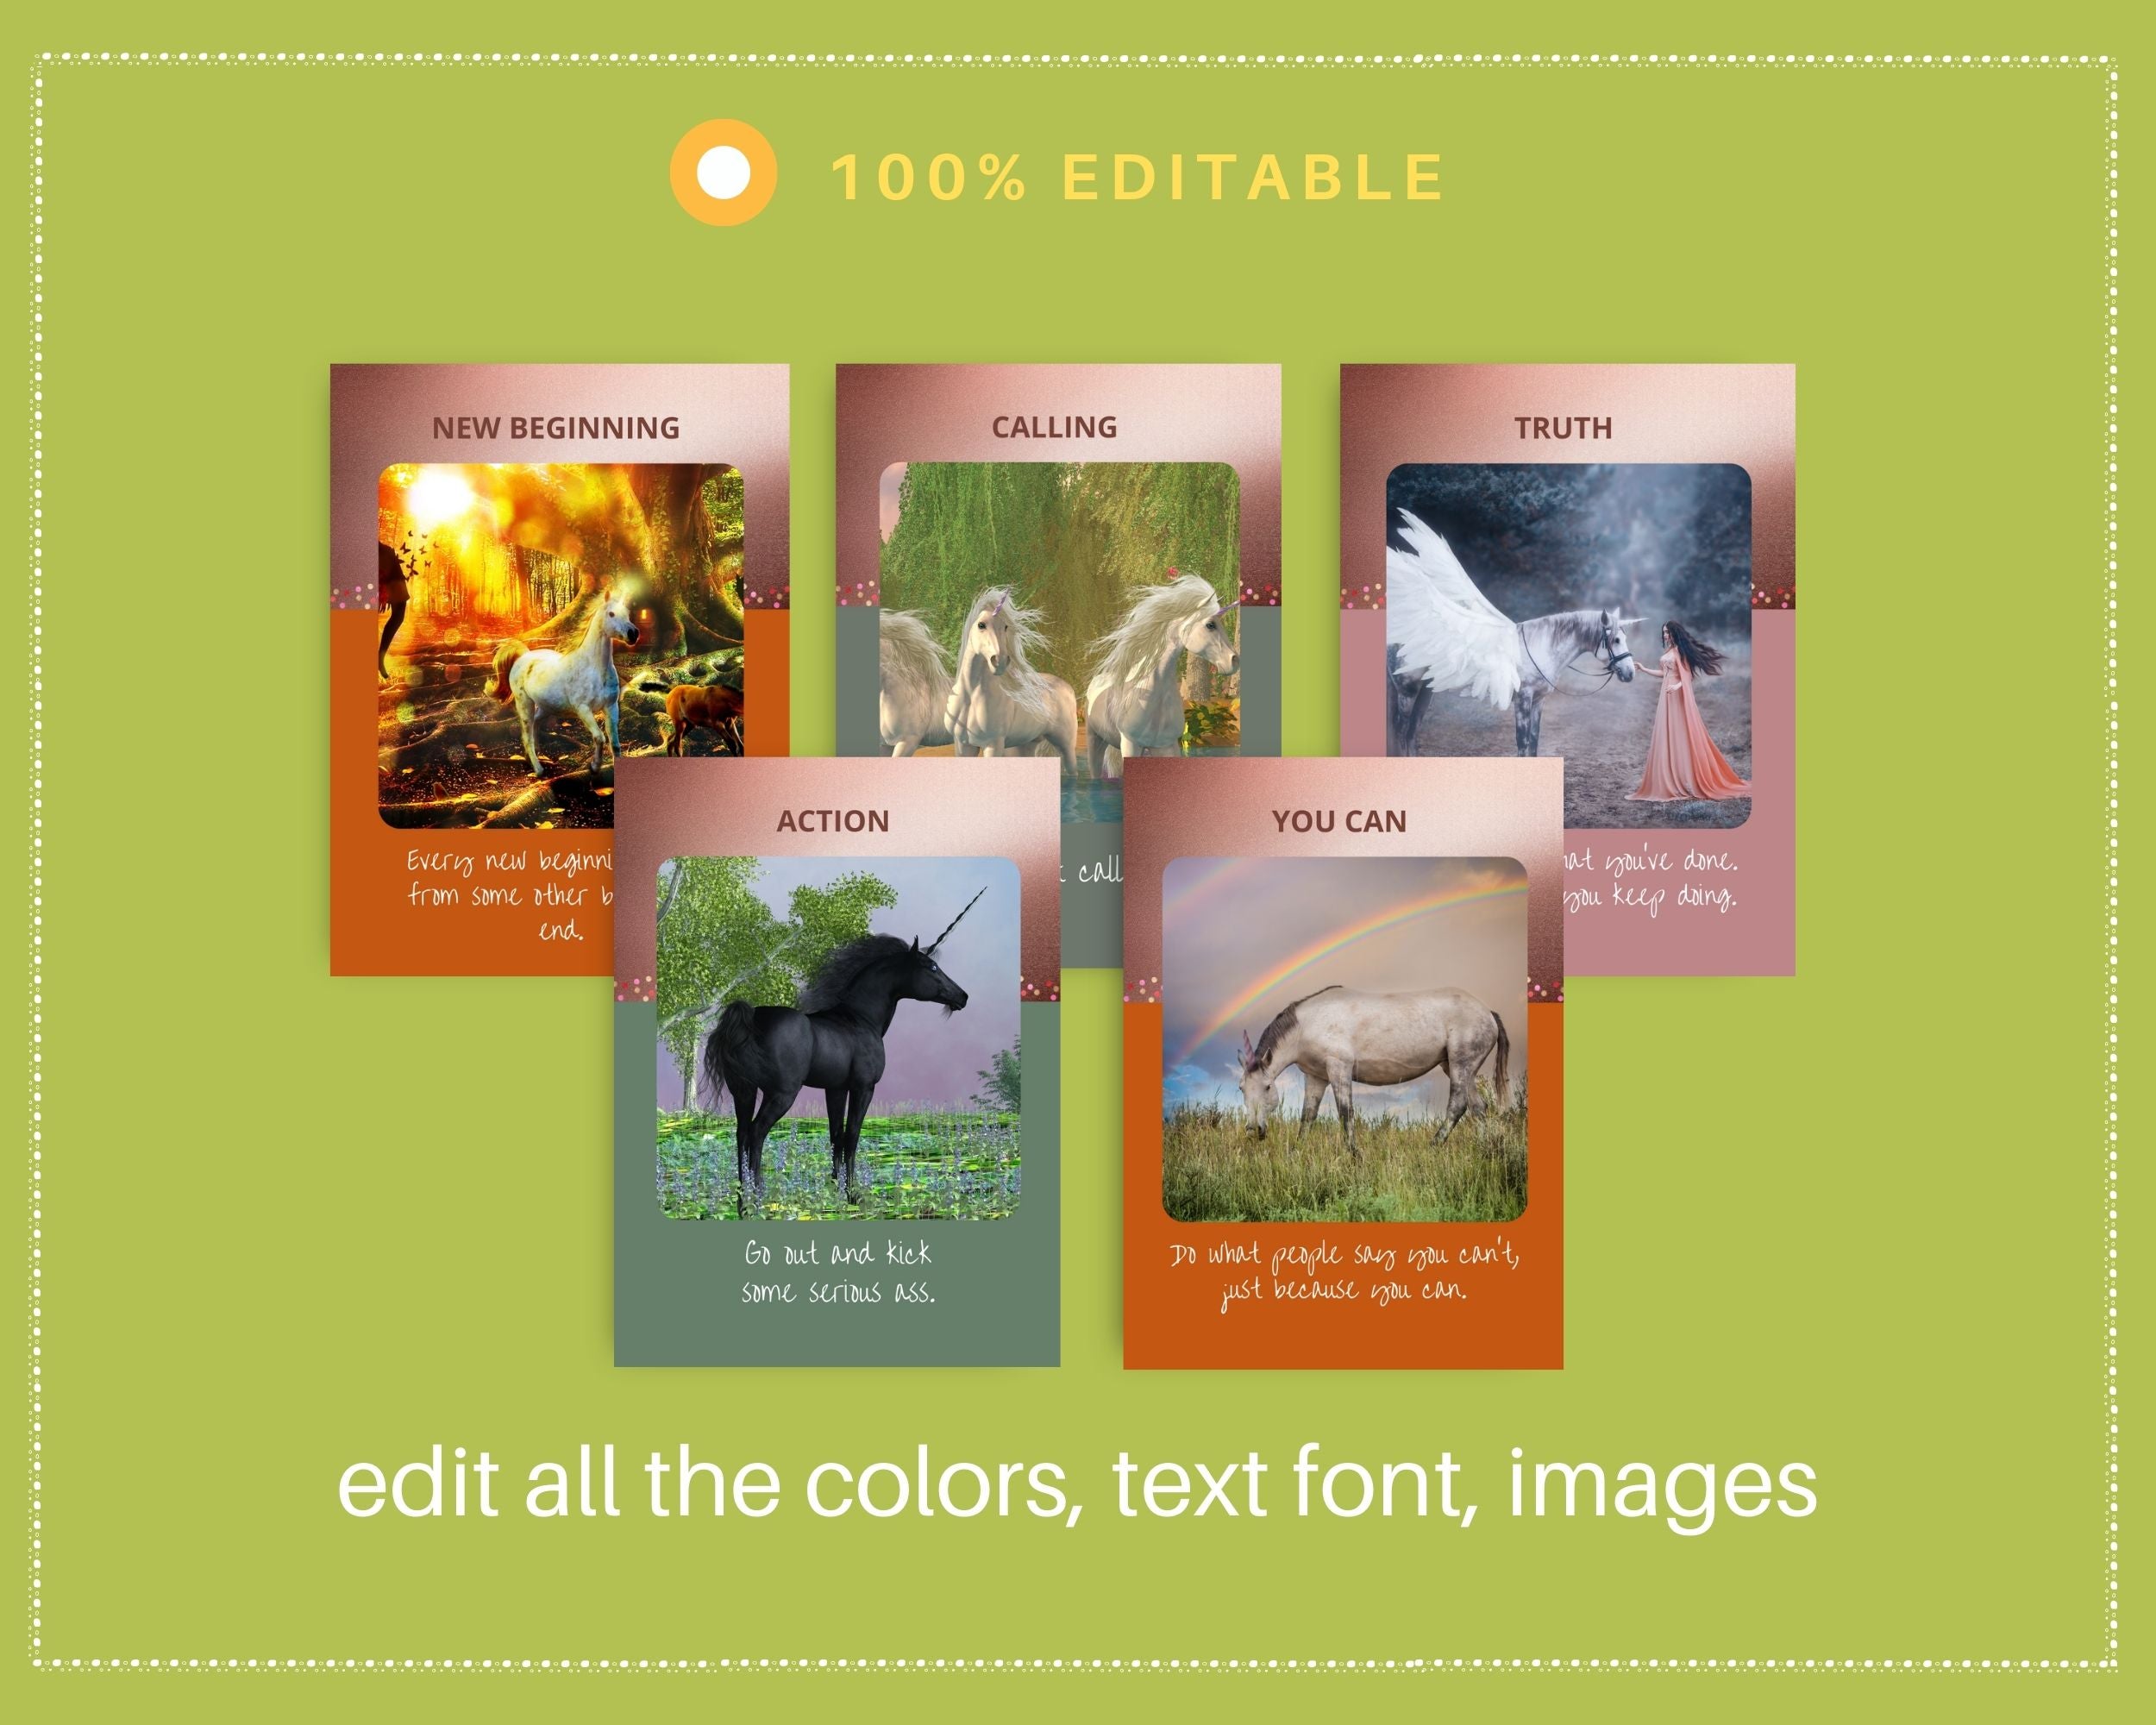 Mystical Horse Oracle Card Deck | Editable 20 Card Deck in Canva | Size 3"x 4" | Commercial Use